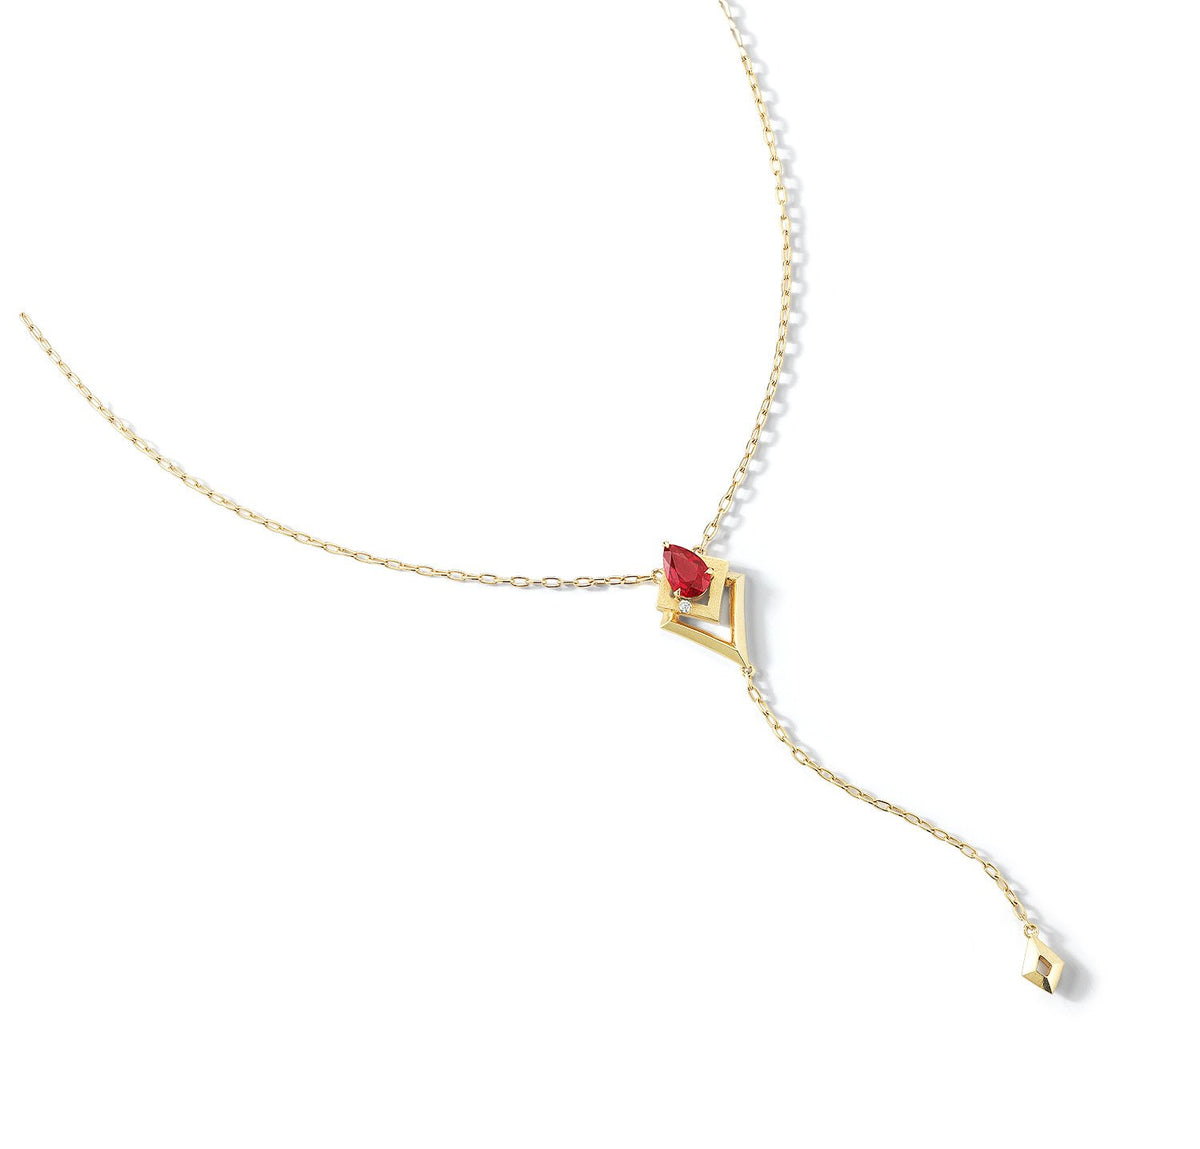 Valani 18K Yellow Gold Arris Ruby Necklace